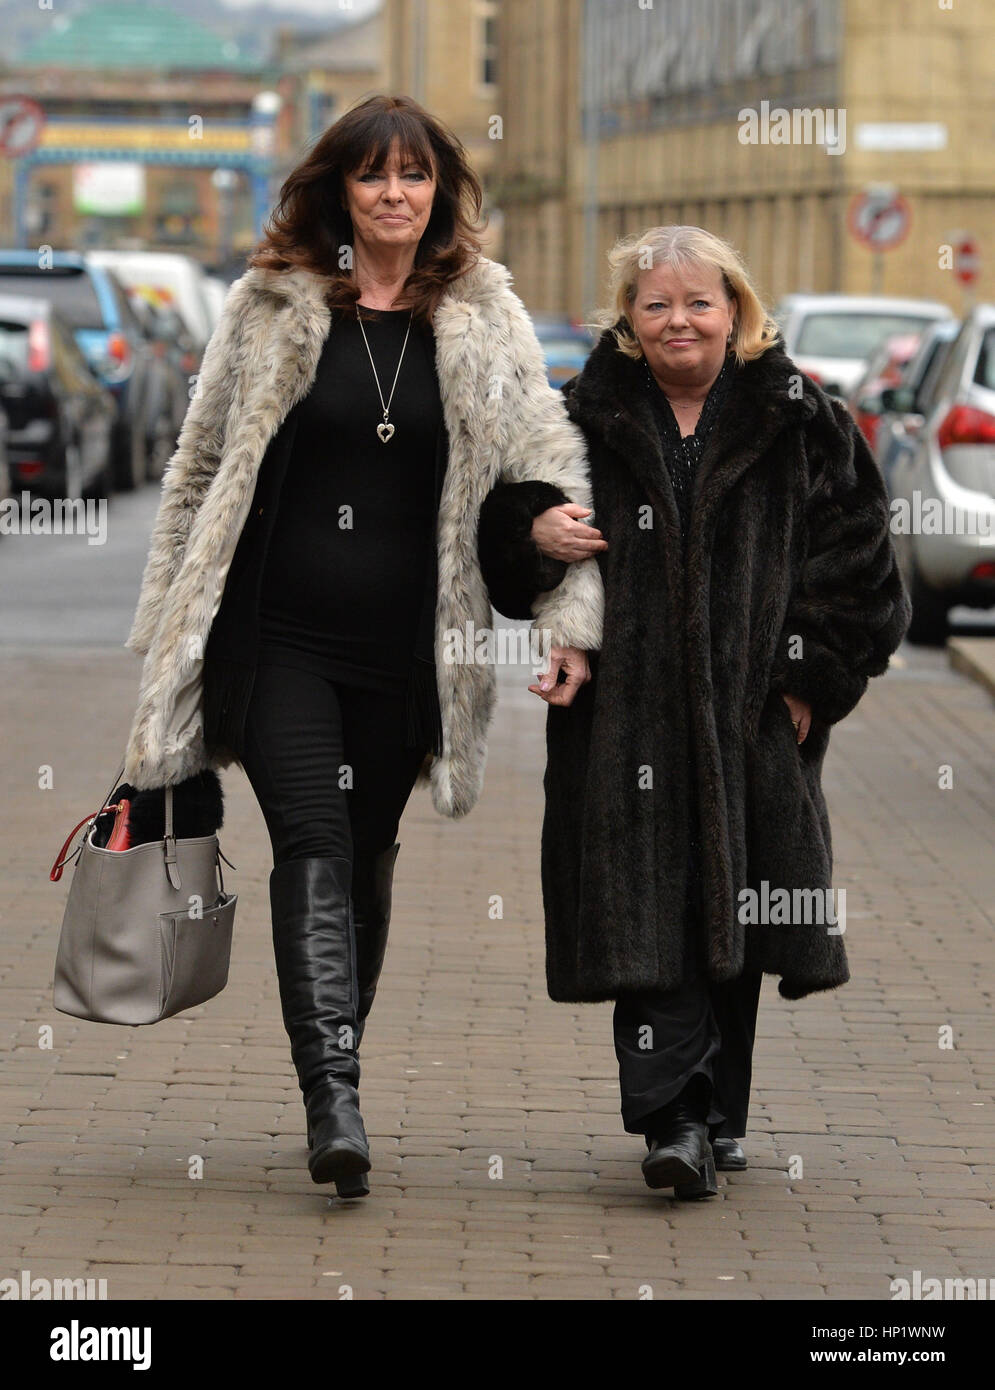 Actresses Vicki Michelle (left) and Sue Hodge arrive for the funeral of 'Allo 'Allo star Gordon Kaye at Huddersfield Parish Church. Stock Photo